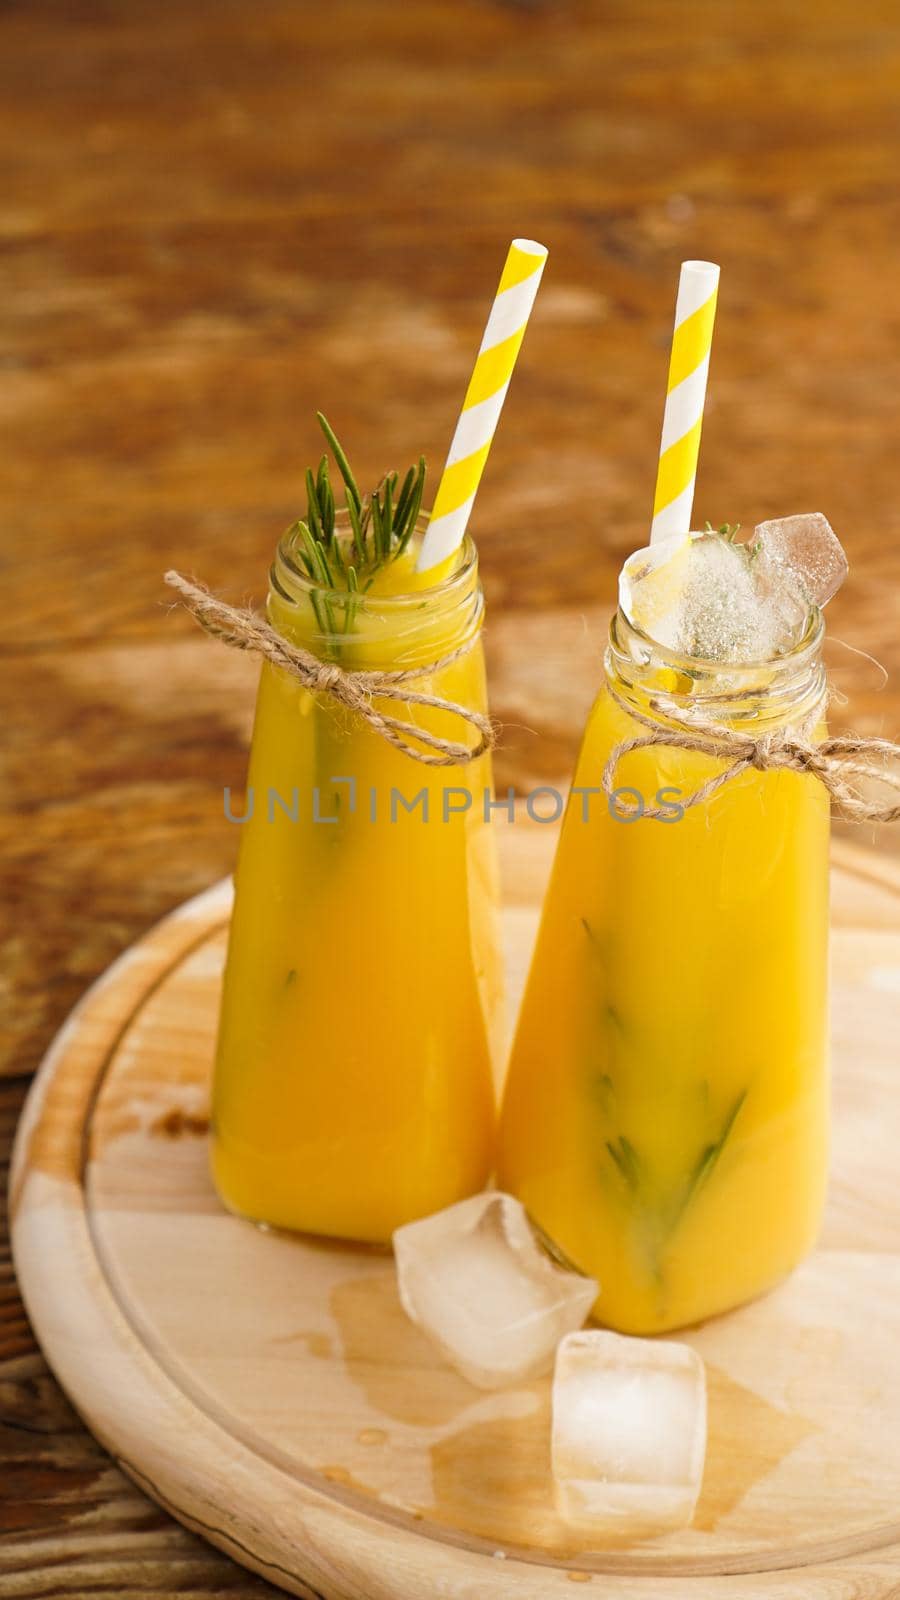 Bottle of orange juice with ice cubes, selective focus. Wooden background. Vertical photo